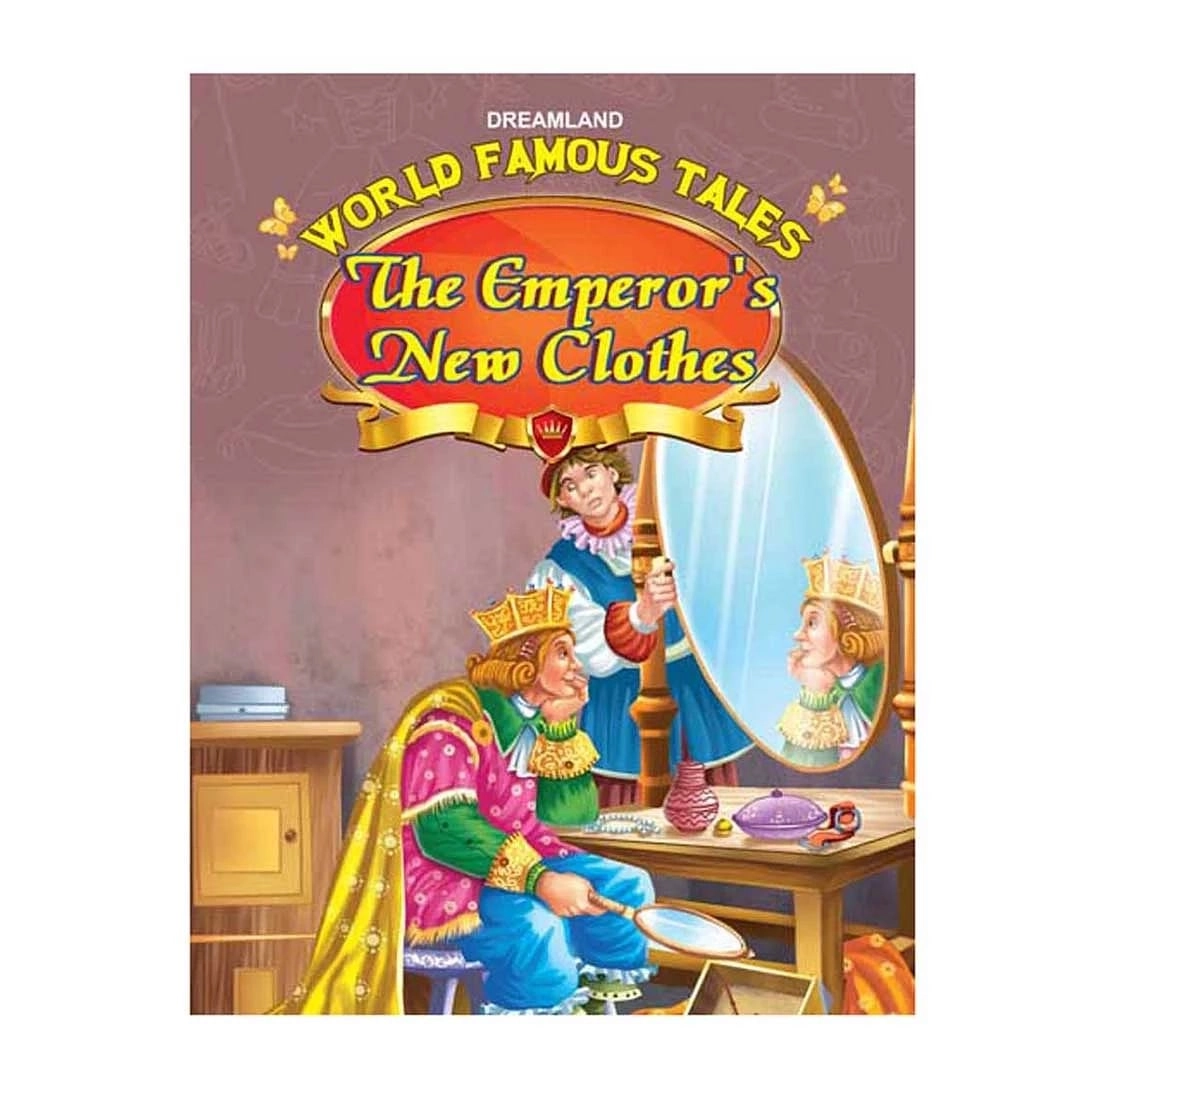 Dreamland Paper Back World Famous Tales the Emperors New Clothes Story Books for kids 2Y+, Multicolour